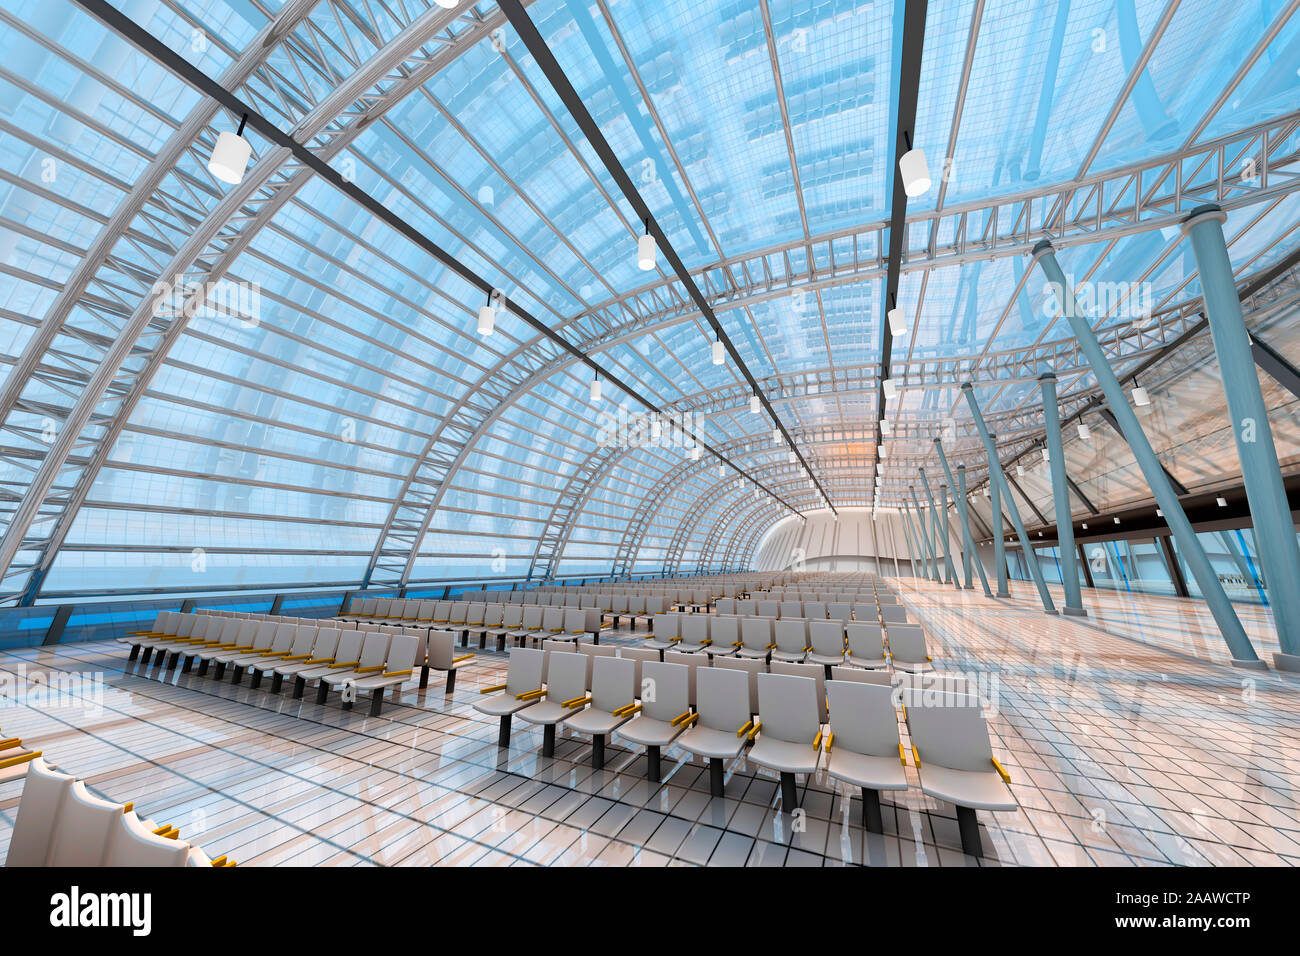 Architecture visualization of airport Stock Photo